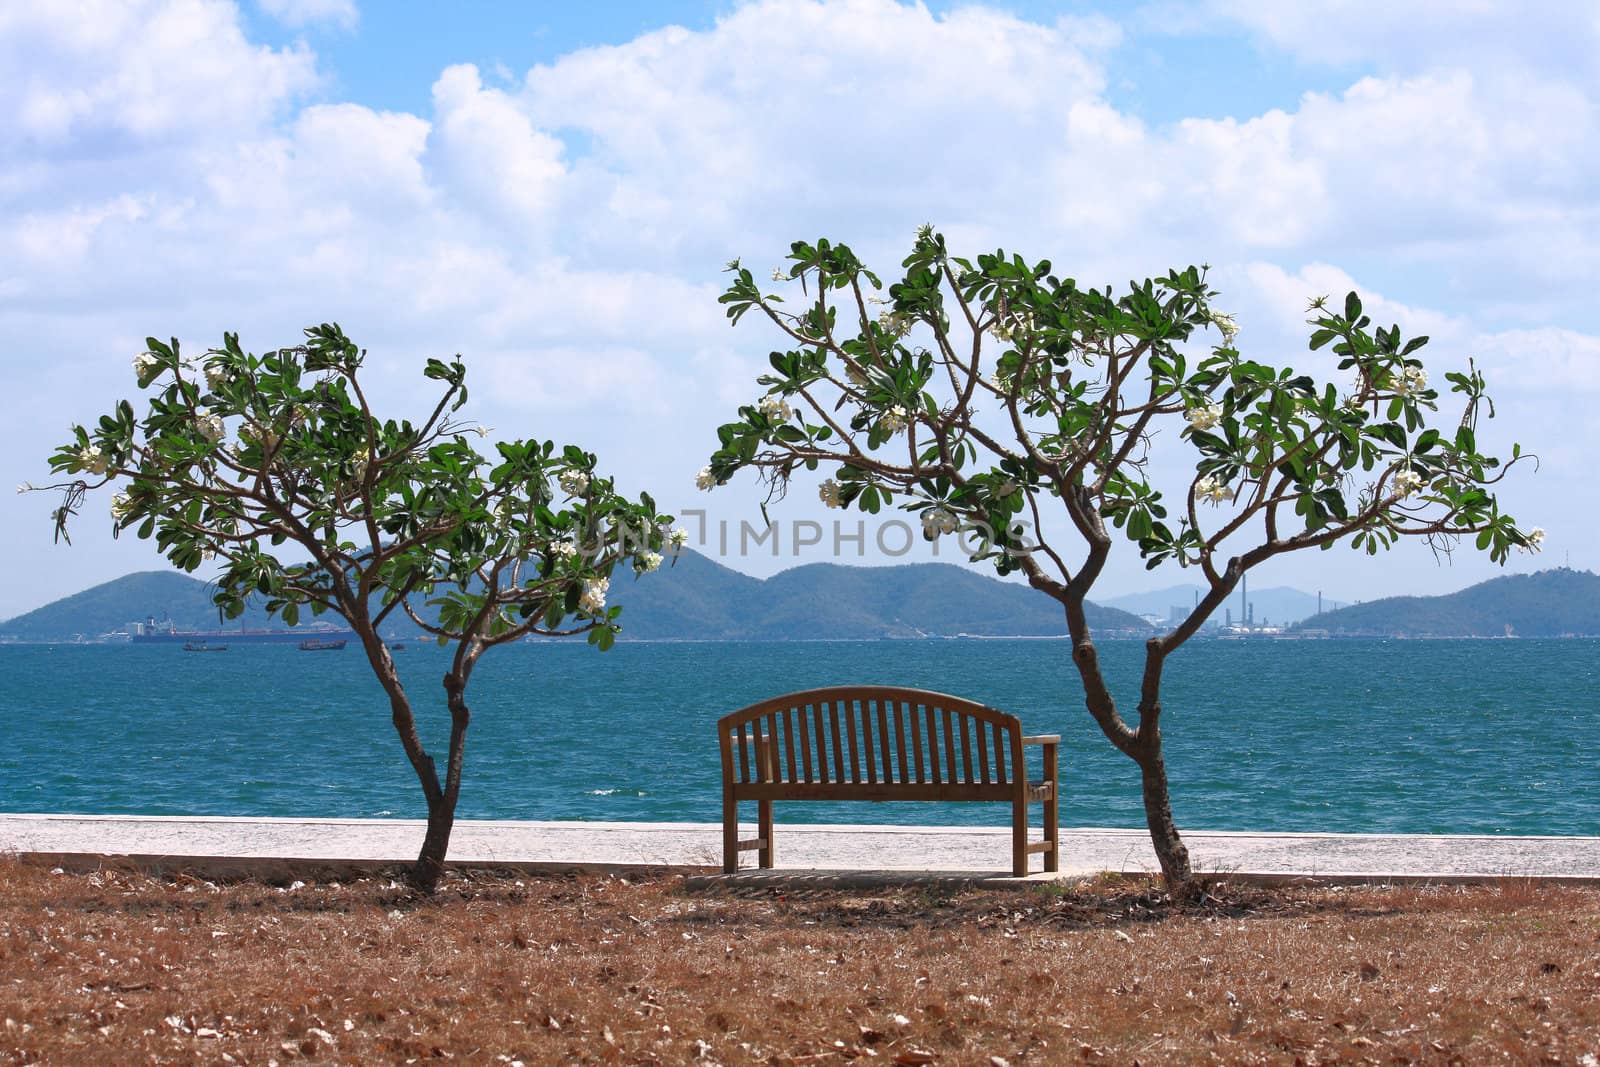 A view of Sichang Island in Thailand,with plumeria trees and chair provided for sitting to relax. There are many kind of boat around this island, such as fishing boat, cargo ship,barge ,etc.